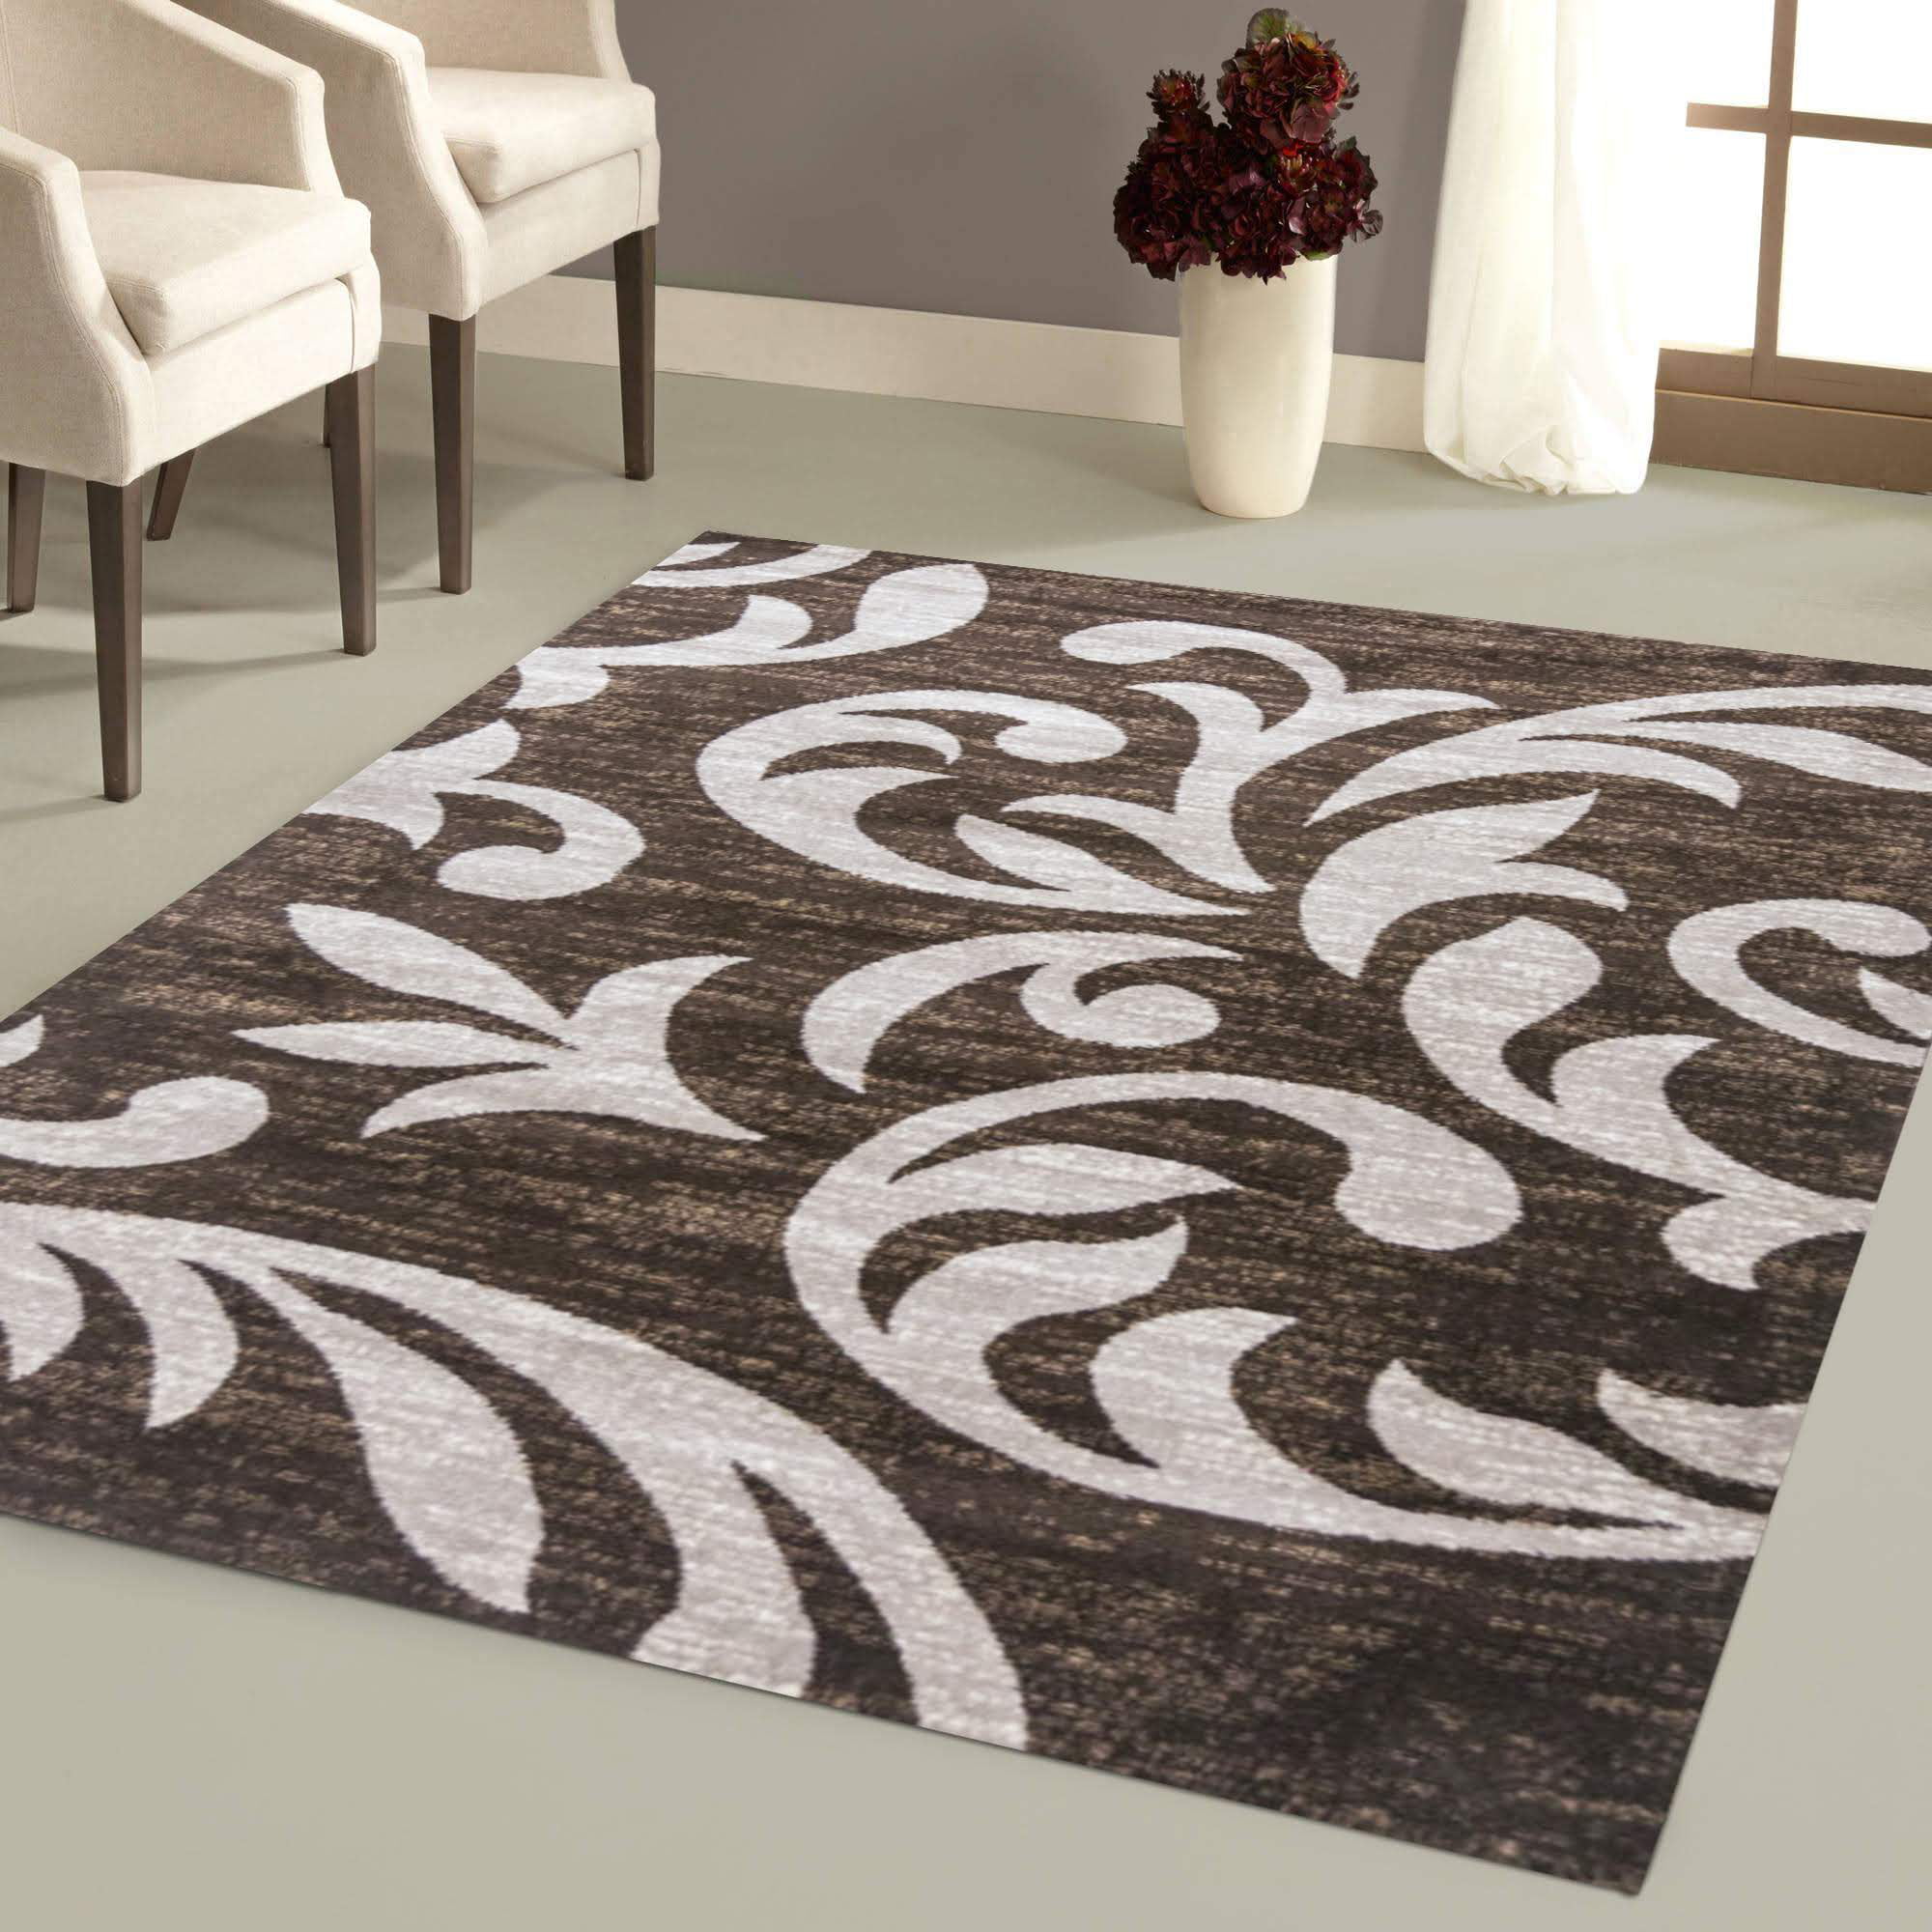 Modern Rug Contemporary Checked Carpet Small Extra Large Mats Brown Beige Rugs 